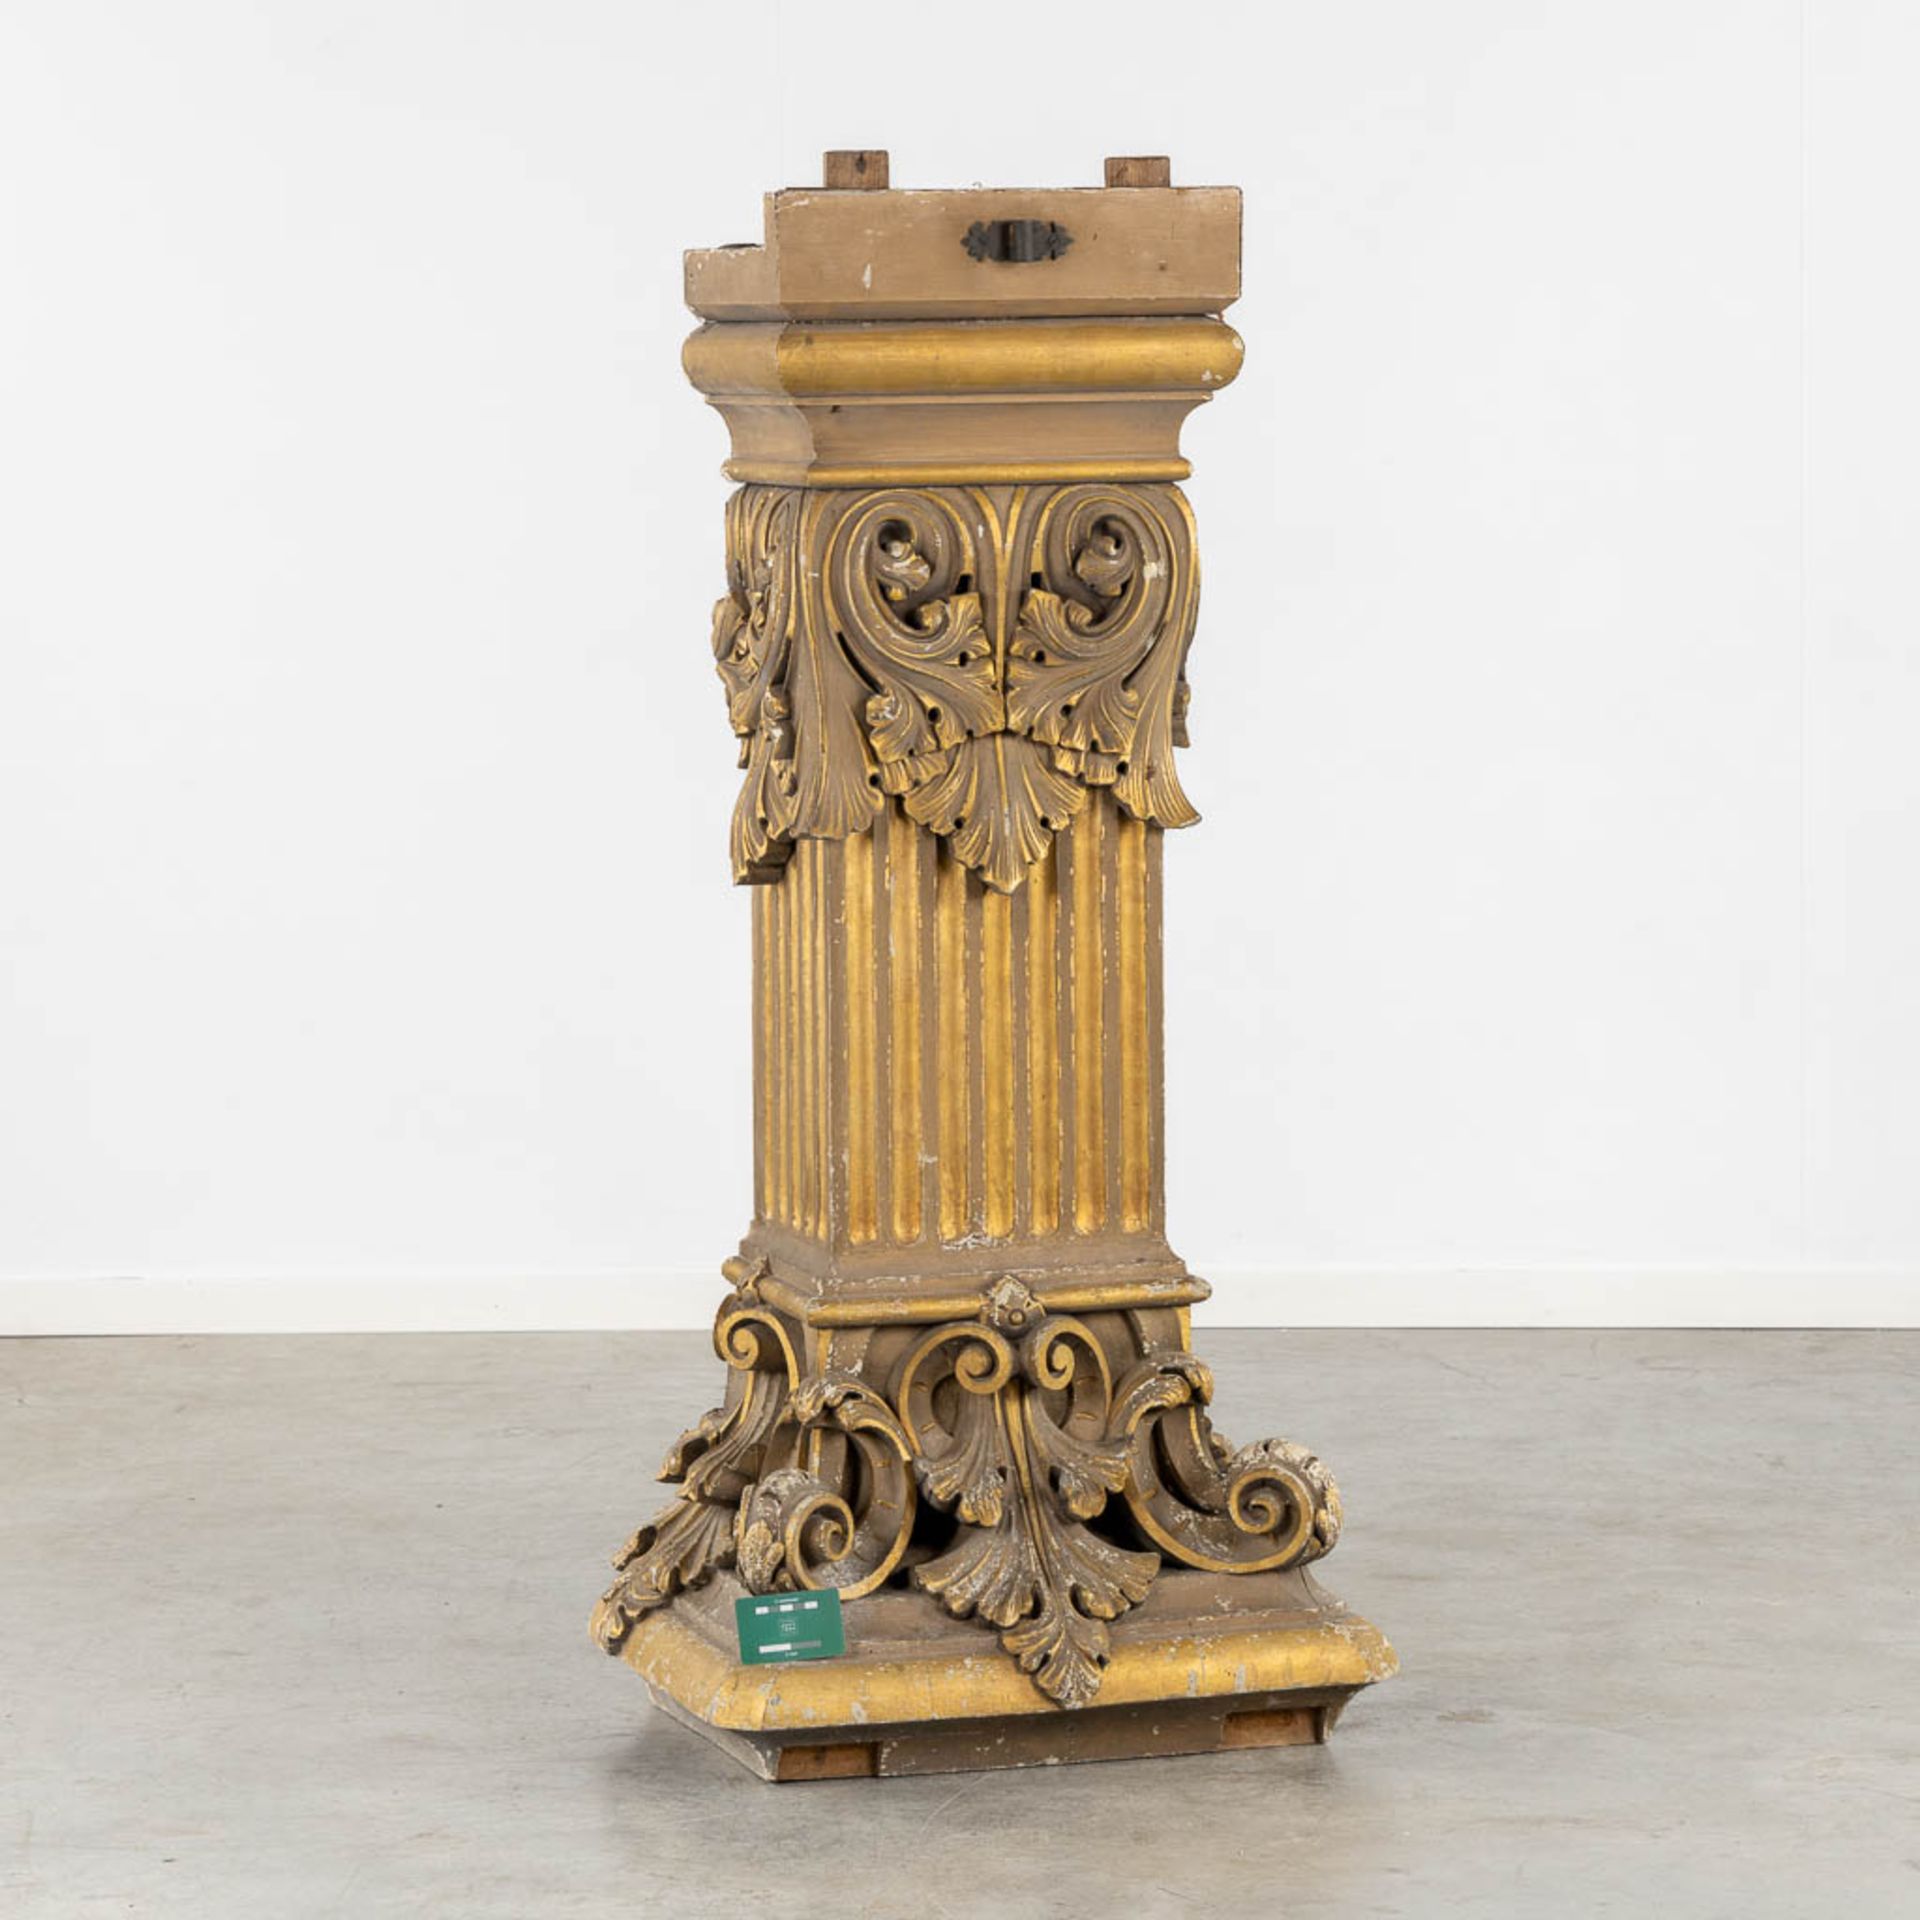 A richly gilt and woodsculptured pedestal with an ionic capitel. Circa 1900. (L:44 x W:60 x H:130 cm - Image 2 of 14